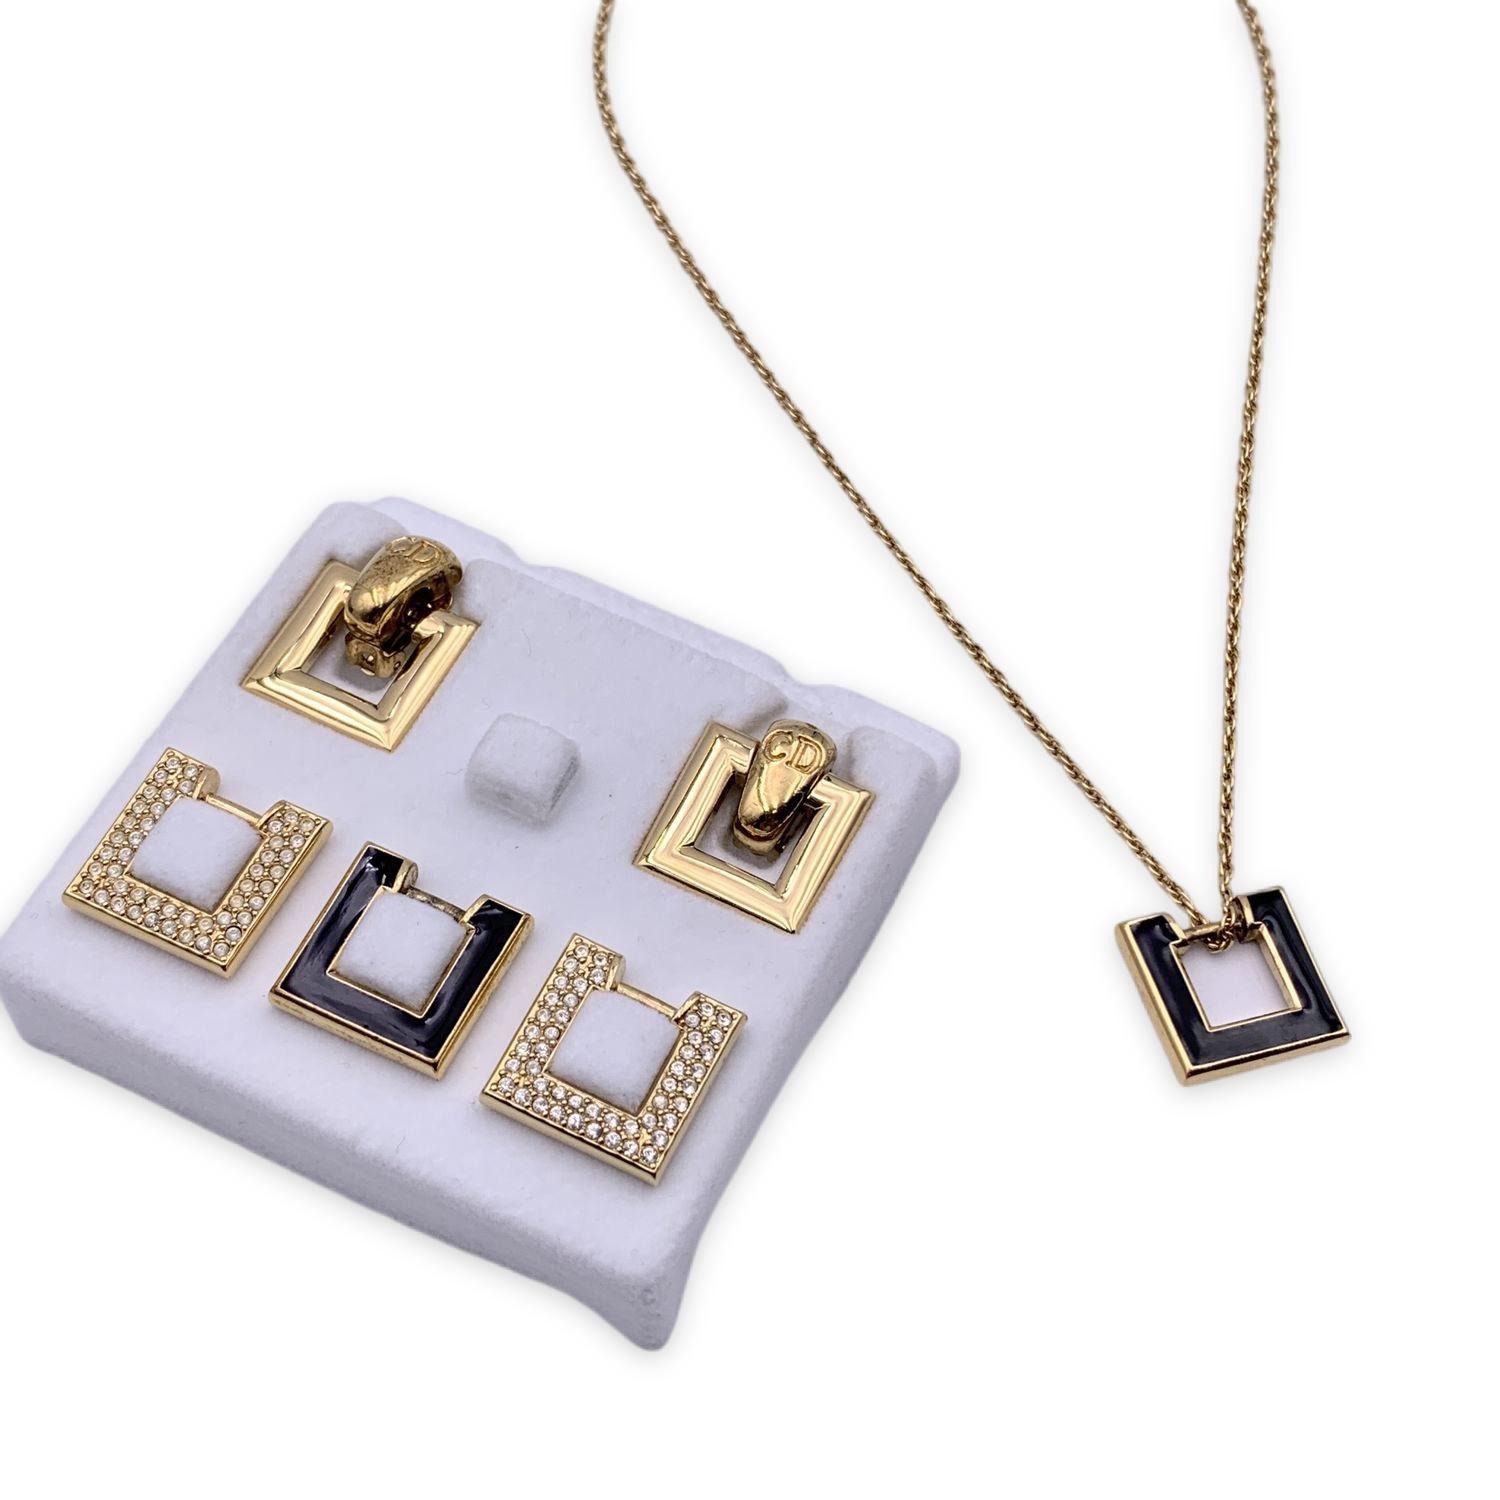 A wonderful vintage Christian Dior pendant necklace and intercheangeable jewelry set. It features 6 interchangeable squared elements in 3 different variants (gold metal, black enamel and crystals) . you can interchange the elements on the necklace